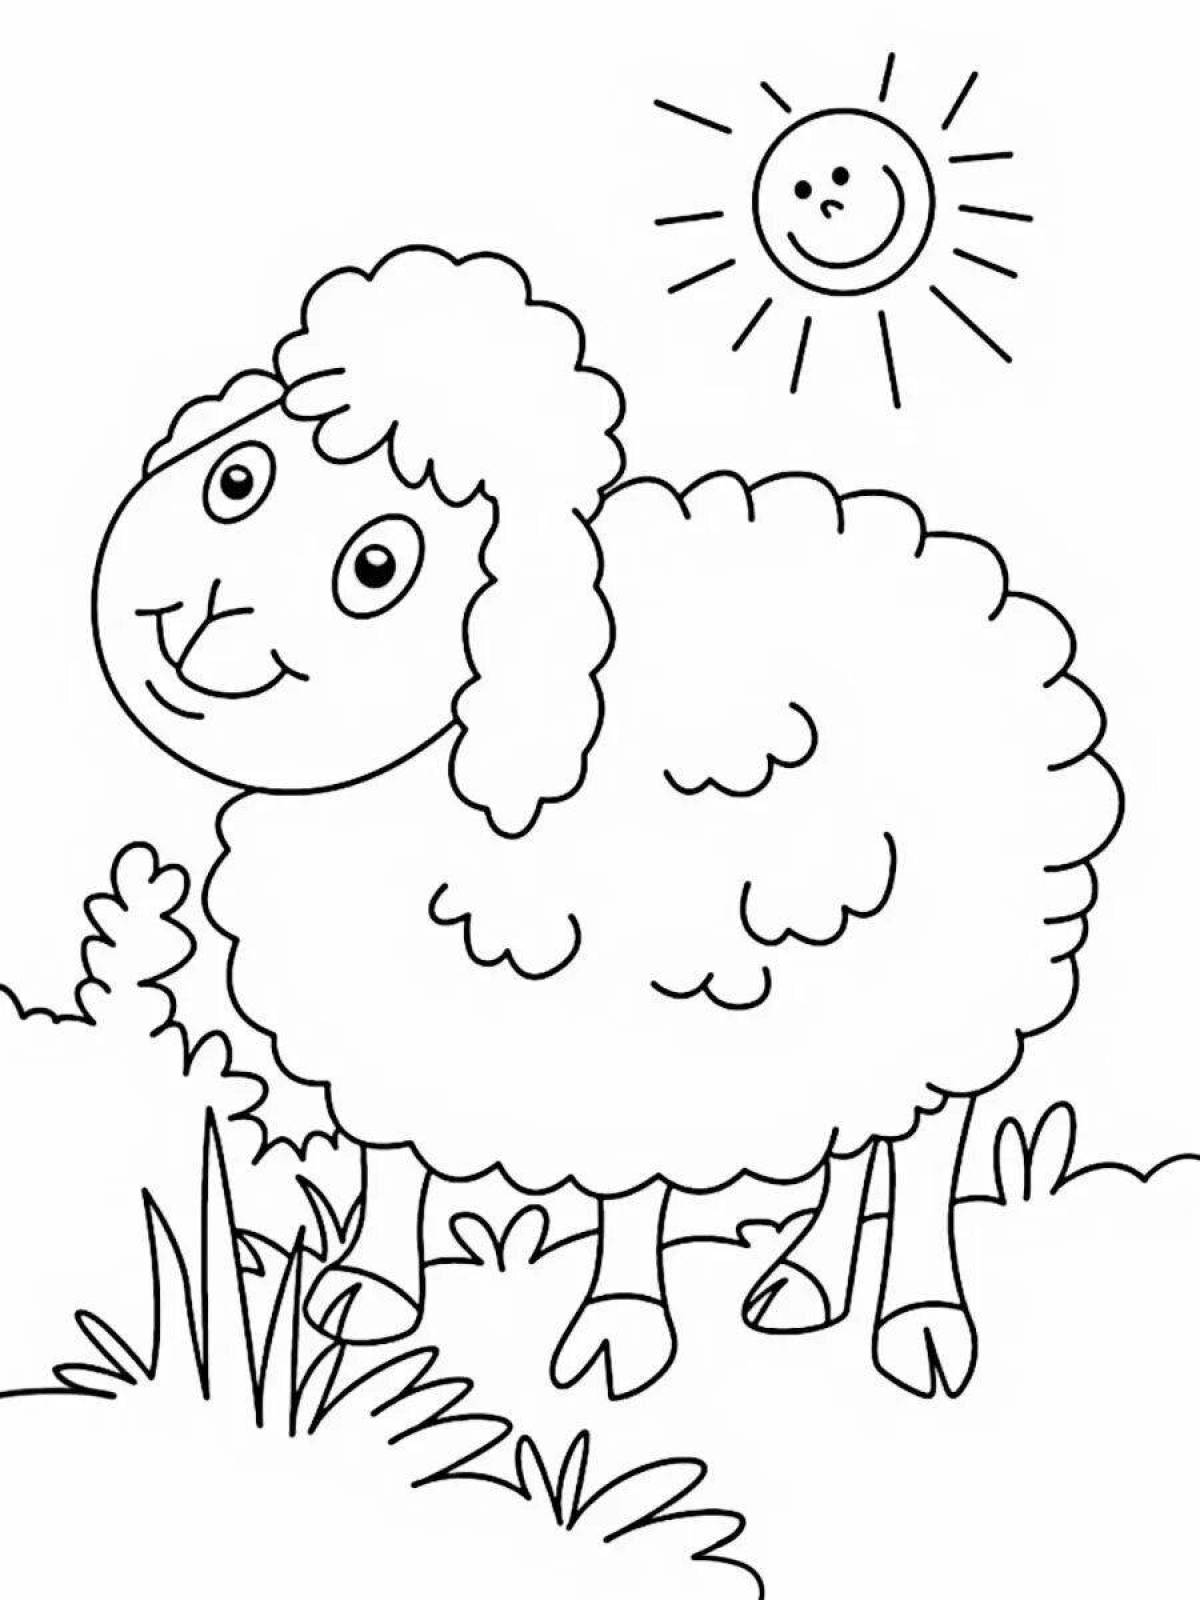 Creative sheep coloring book for 4-5 year olds